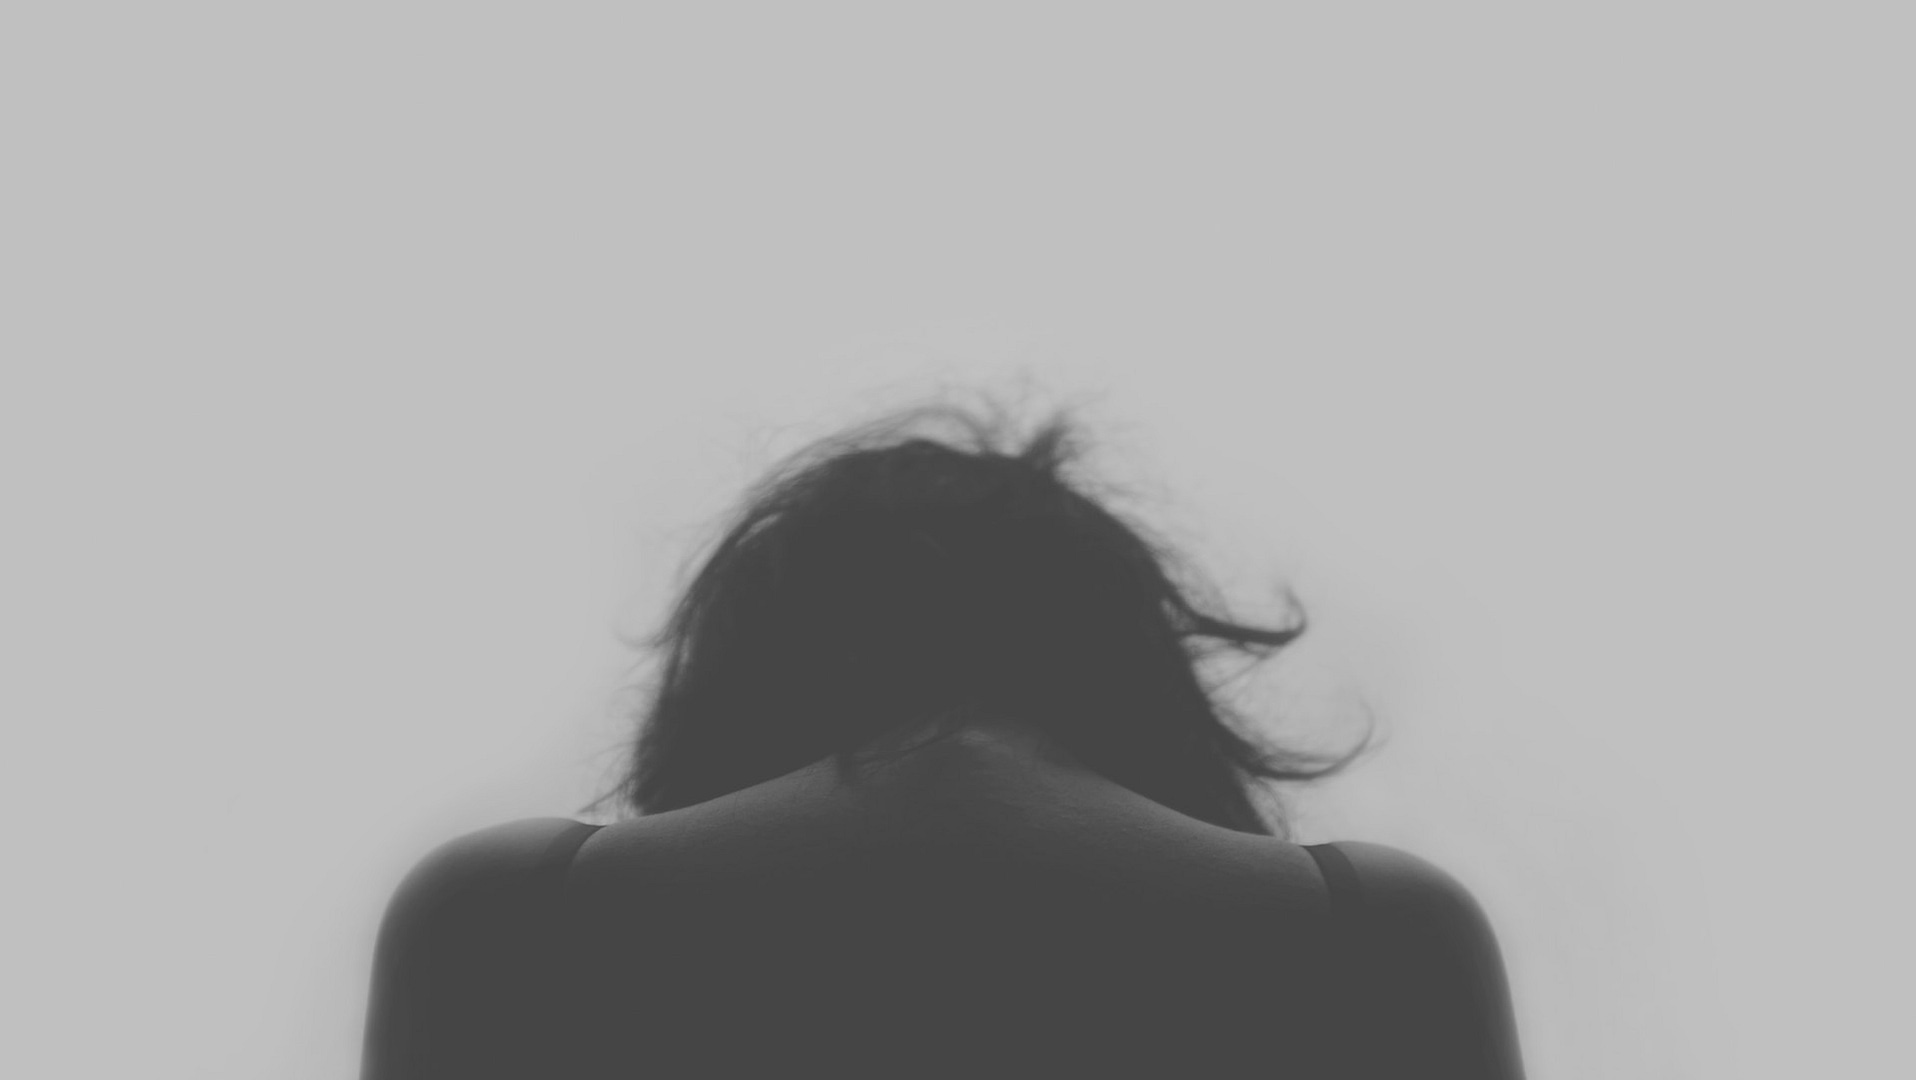 A black and white photo featuring a woman's back, conveying an aura of introspection or melancholy.